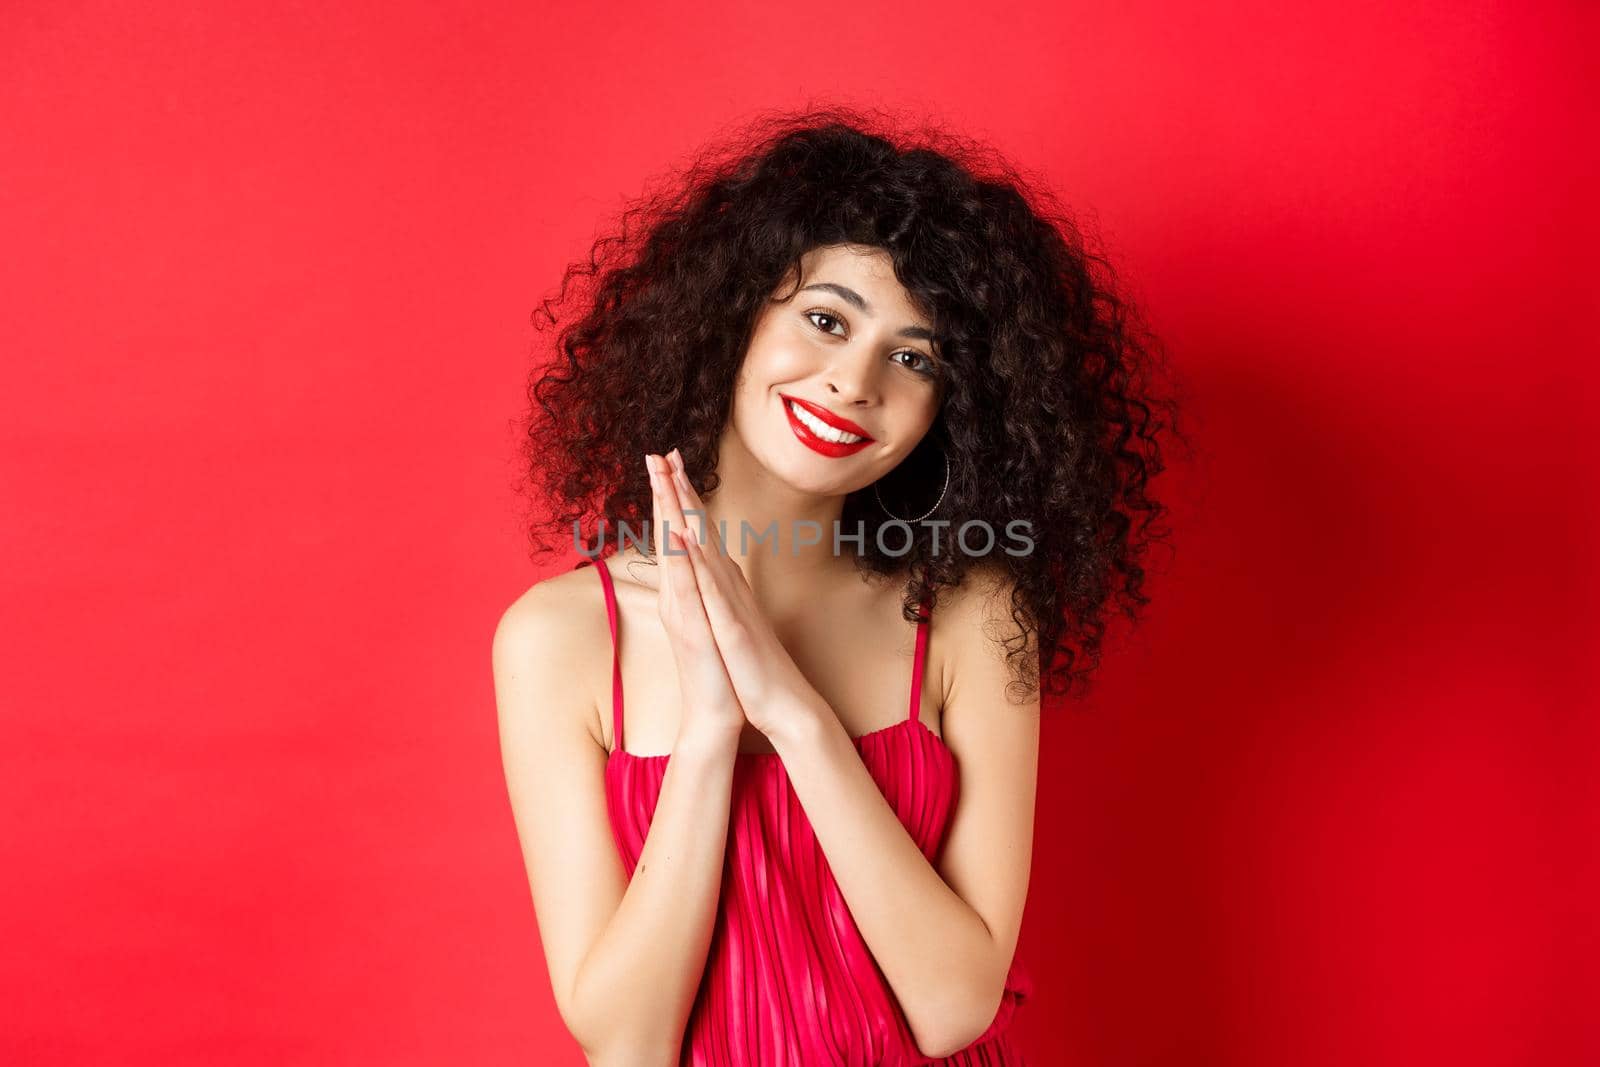 Tender woman with curly hair, wearing red dress, looking at something lovely, thanking you, standing over studio background. Copy space